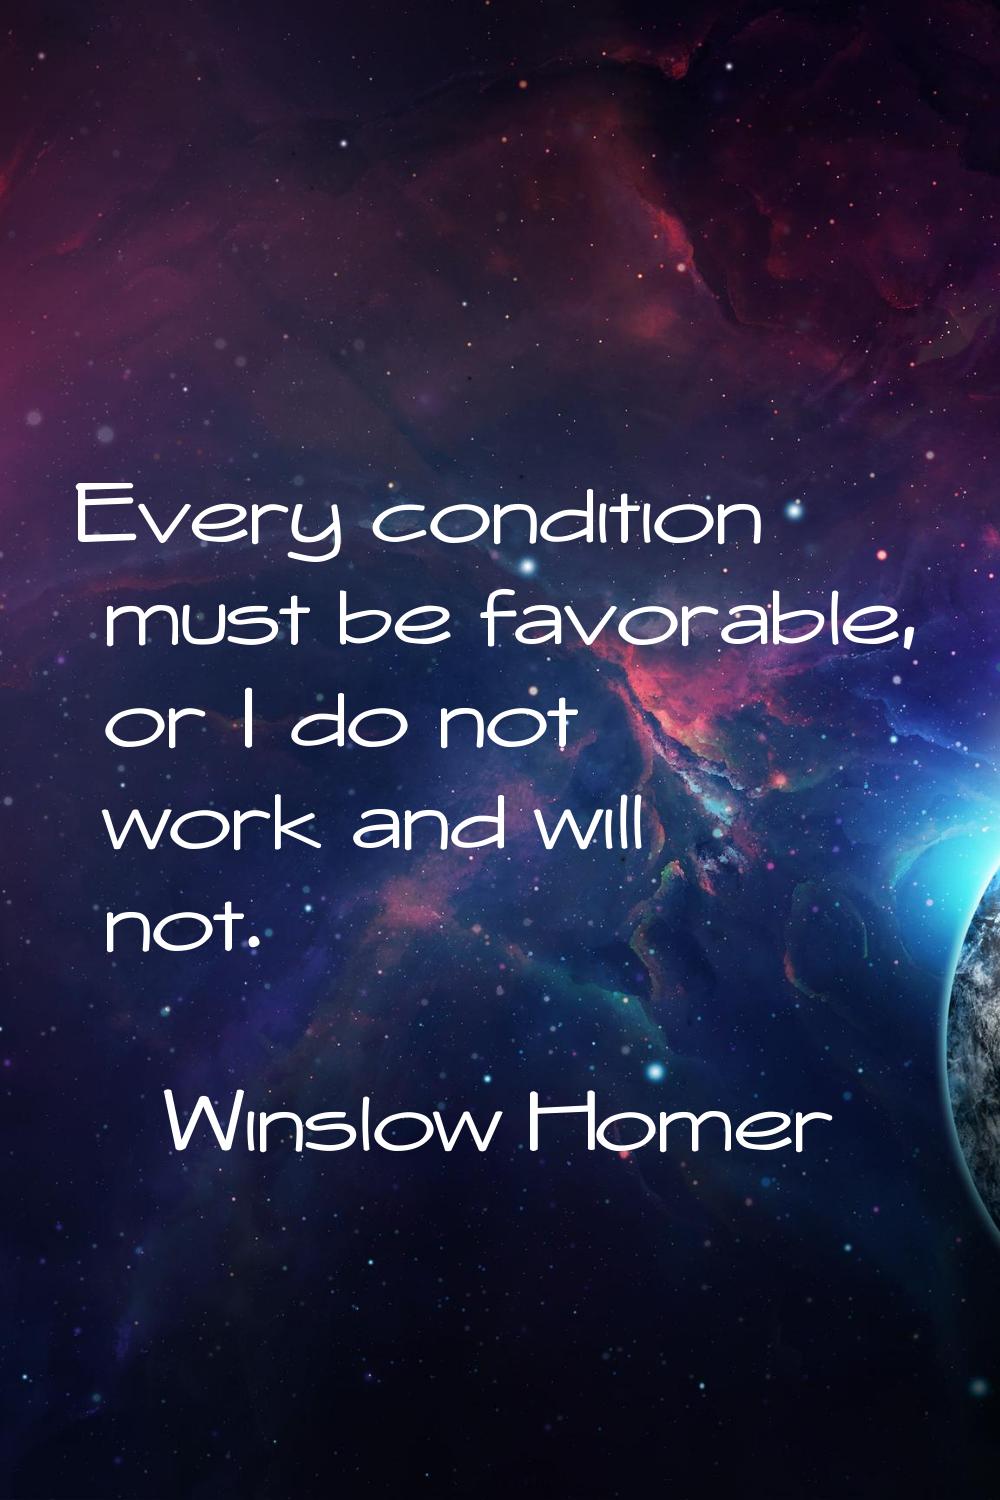 Every condition must be favorable, or I do not work and will not.